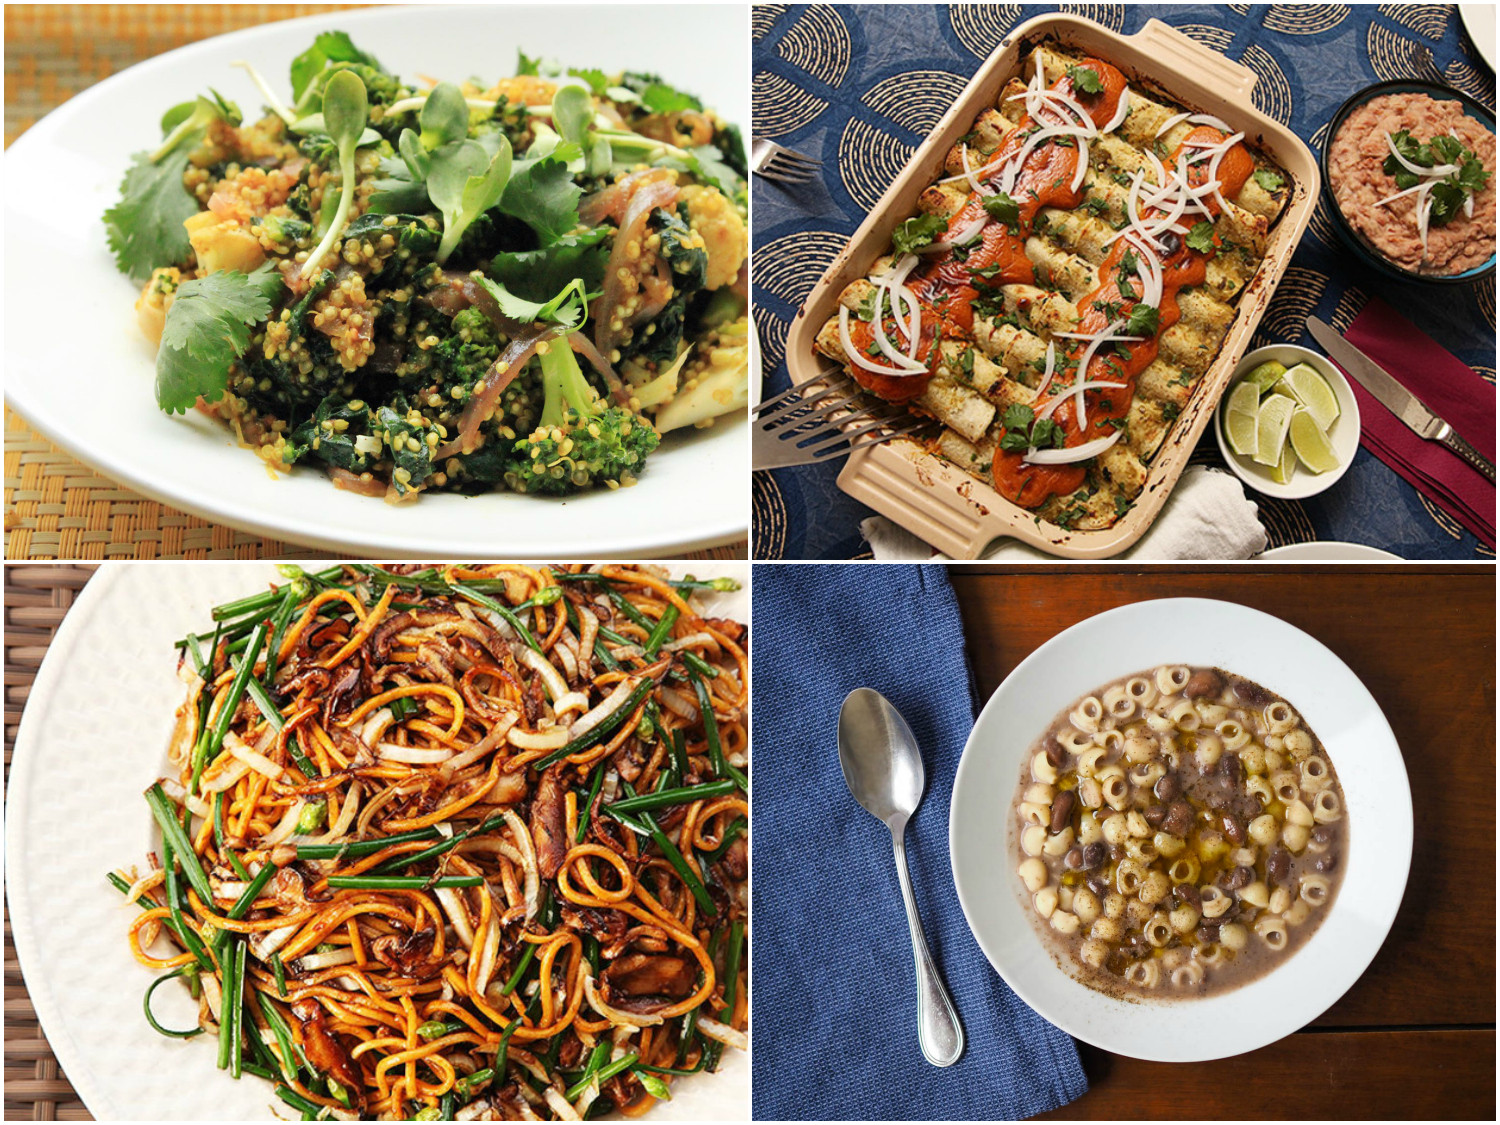 Vegan Recipes Main Dishes
 14 Warming Vegan Main Dishes for Chilly Nights